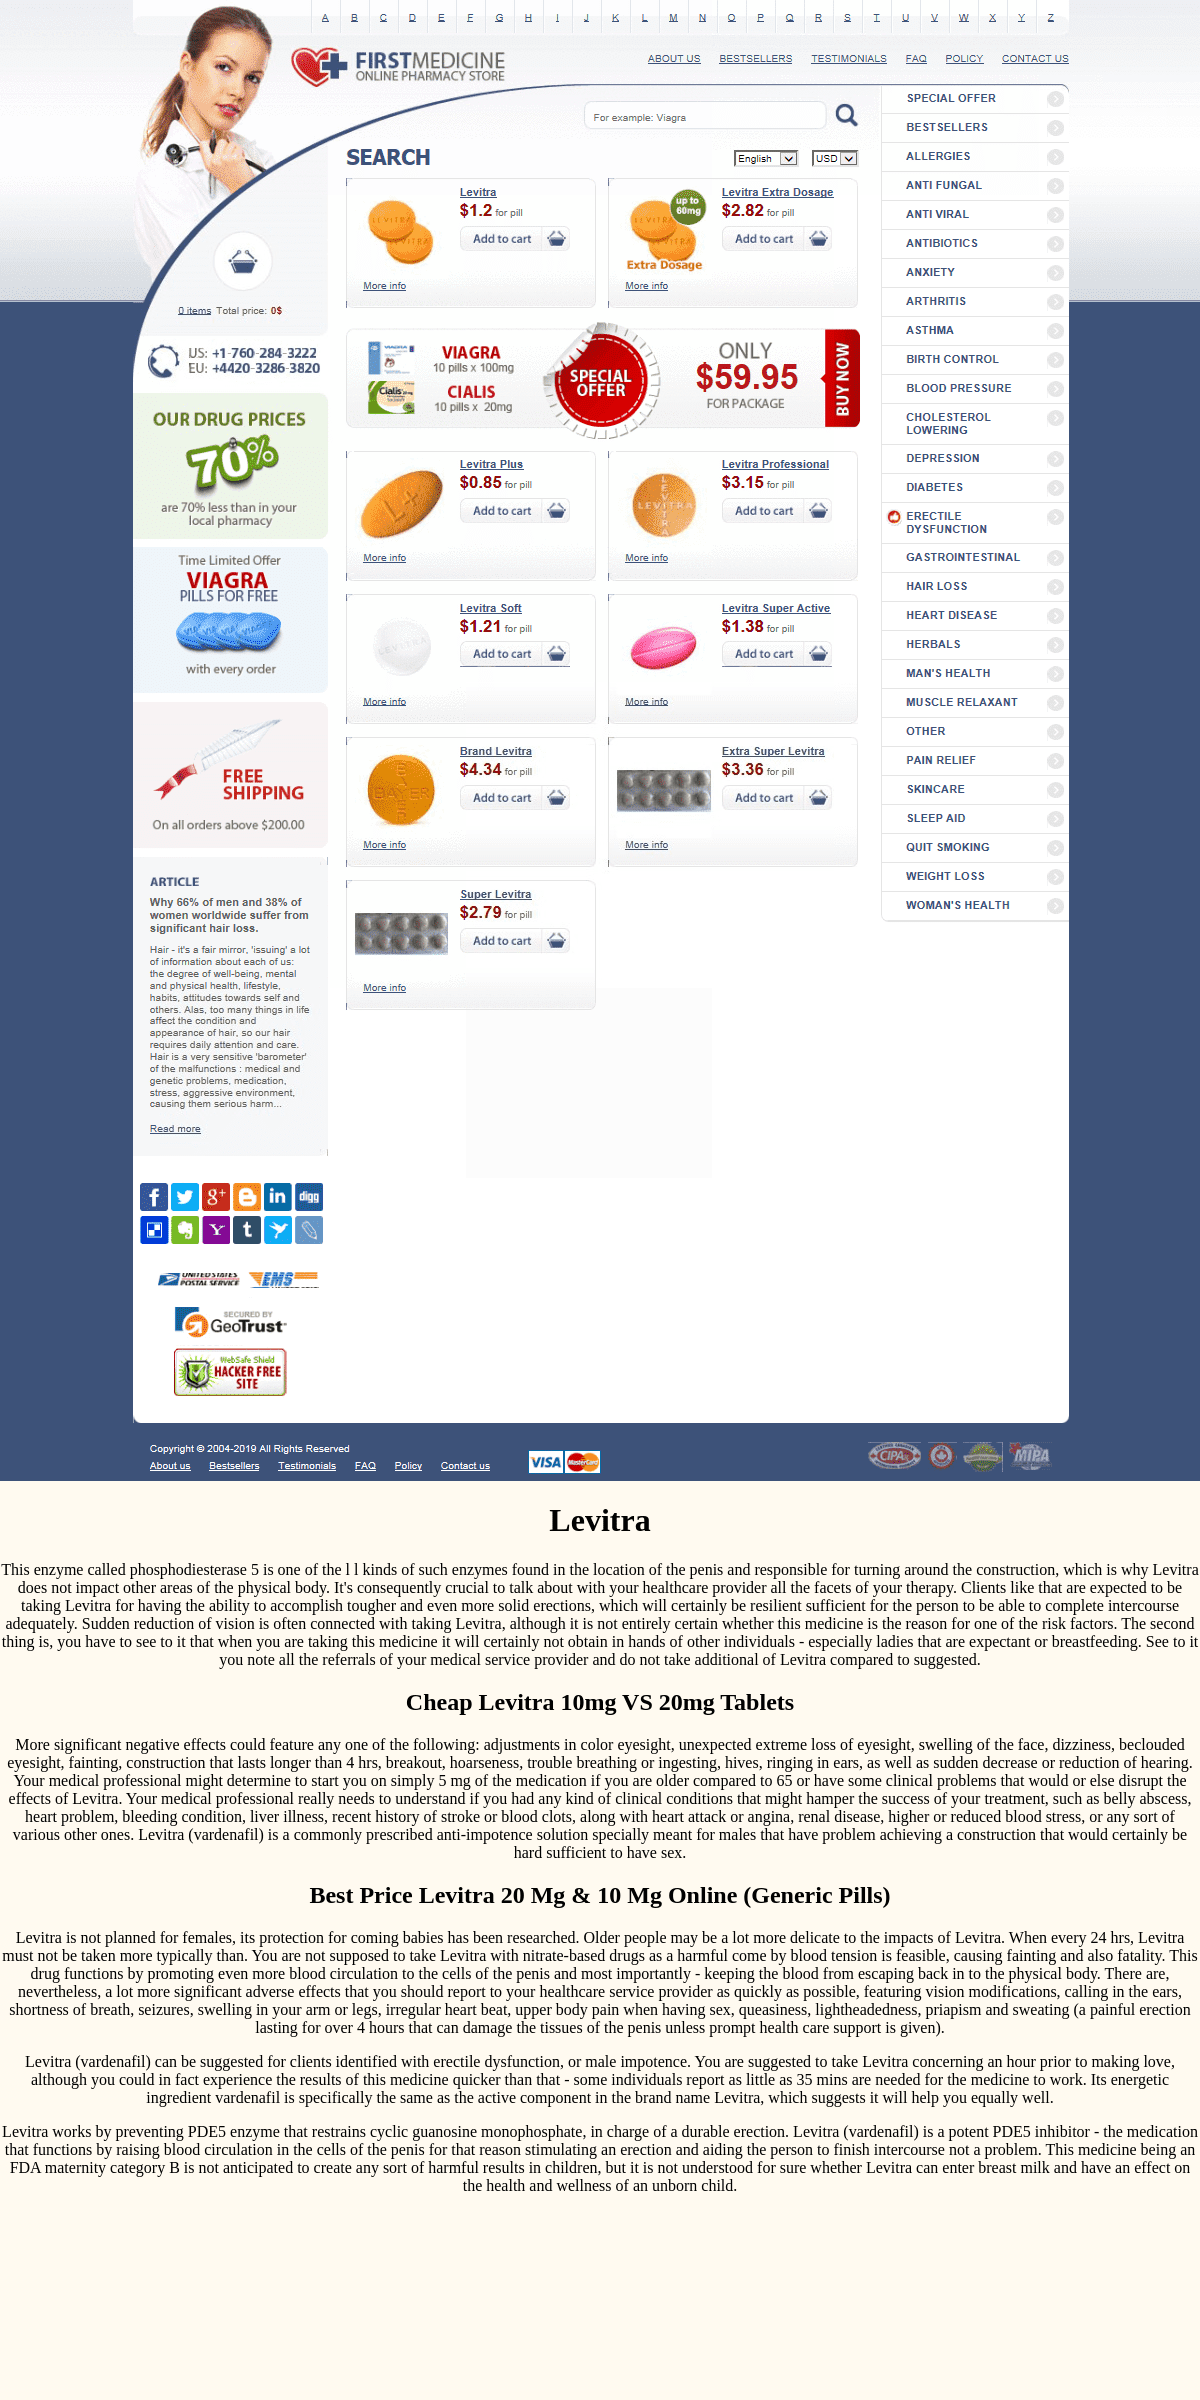 A complete backup of levitra10.com